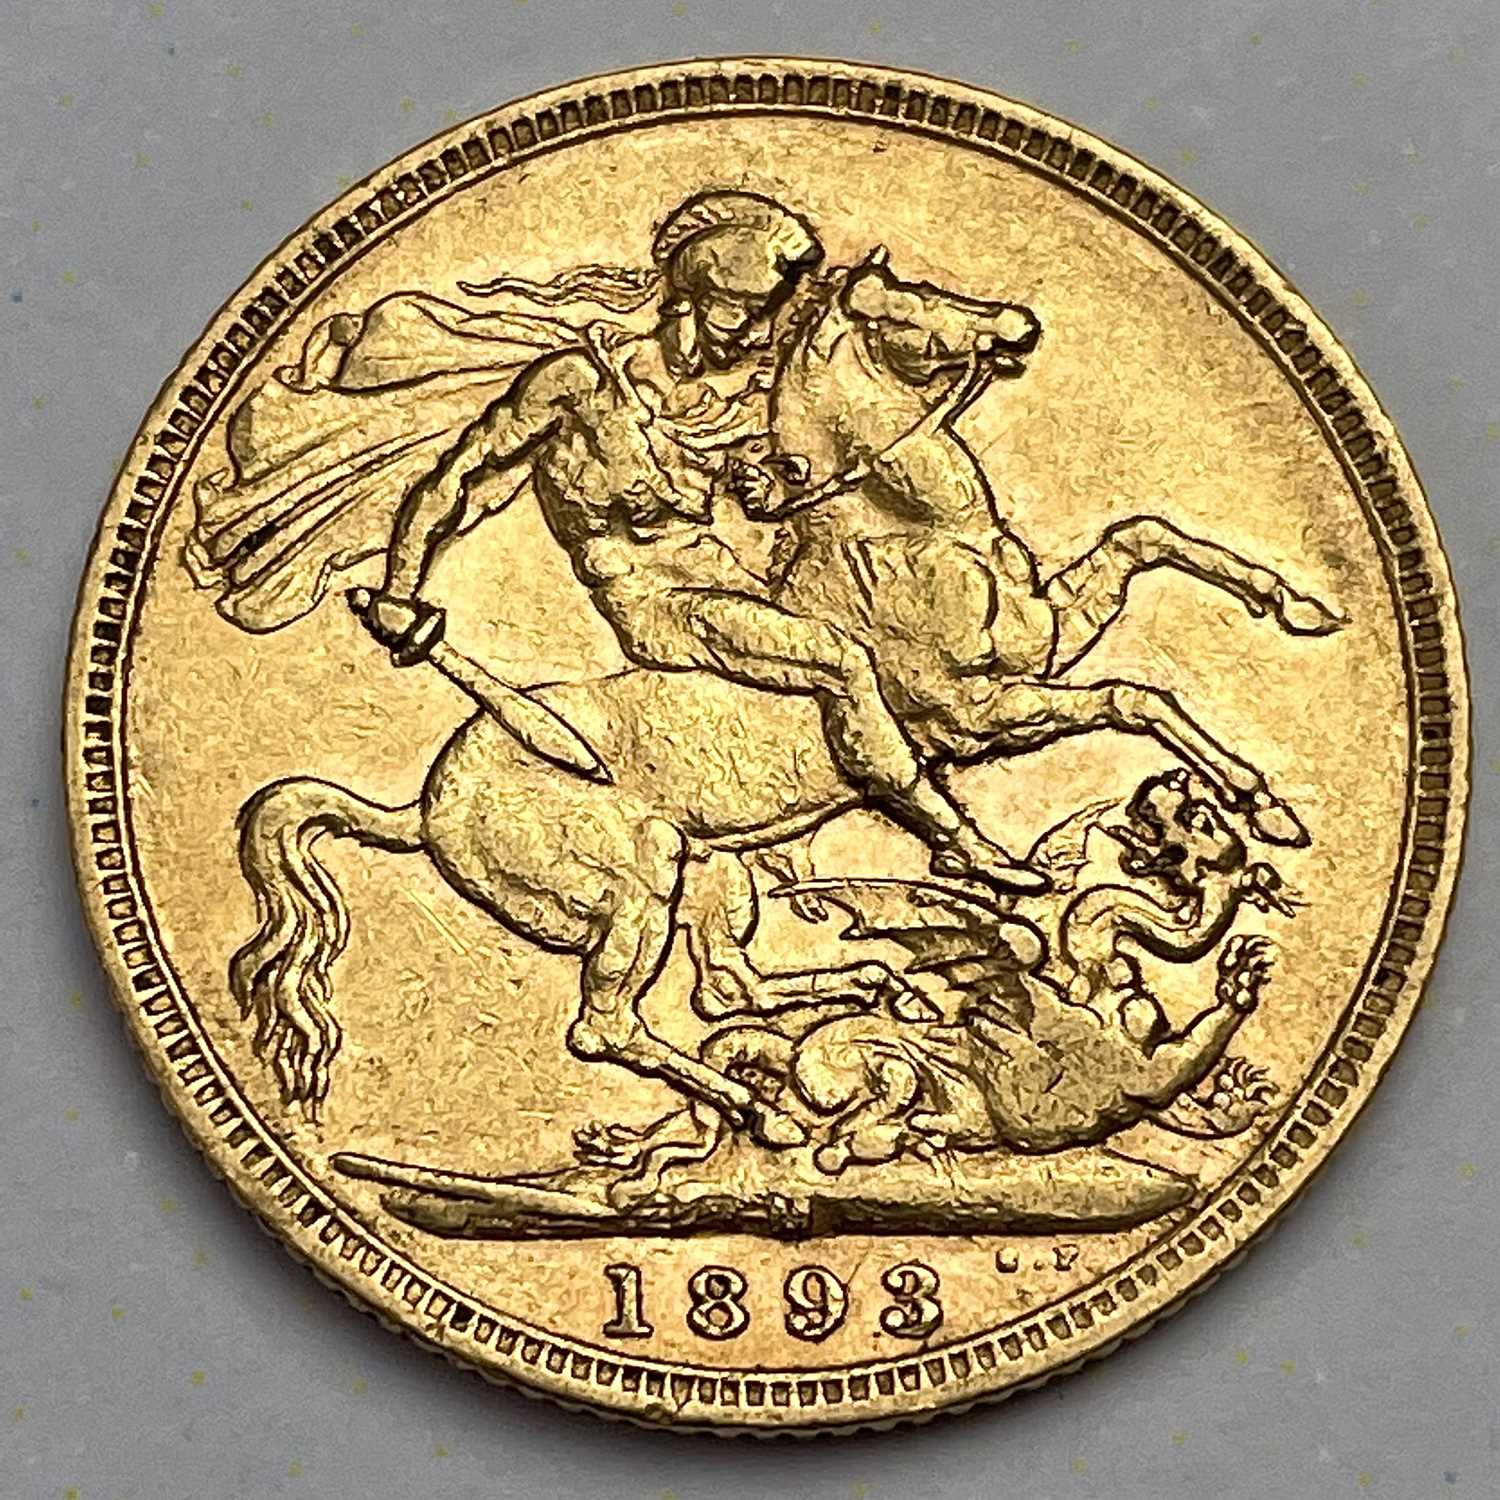 Lot 633 - Victoria 1893 full sovereign coin.